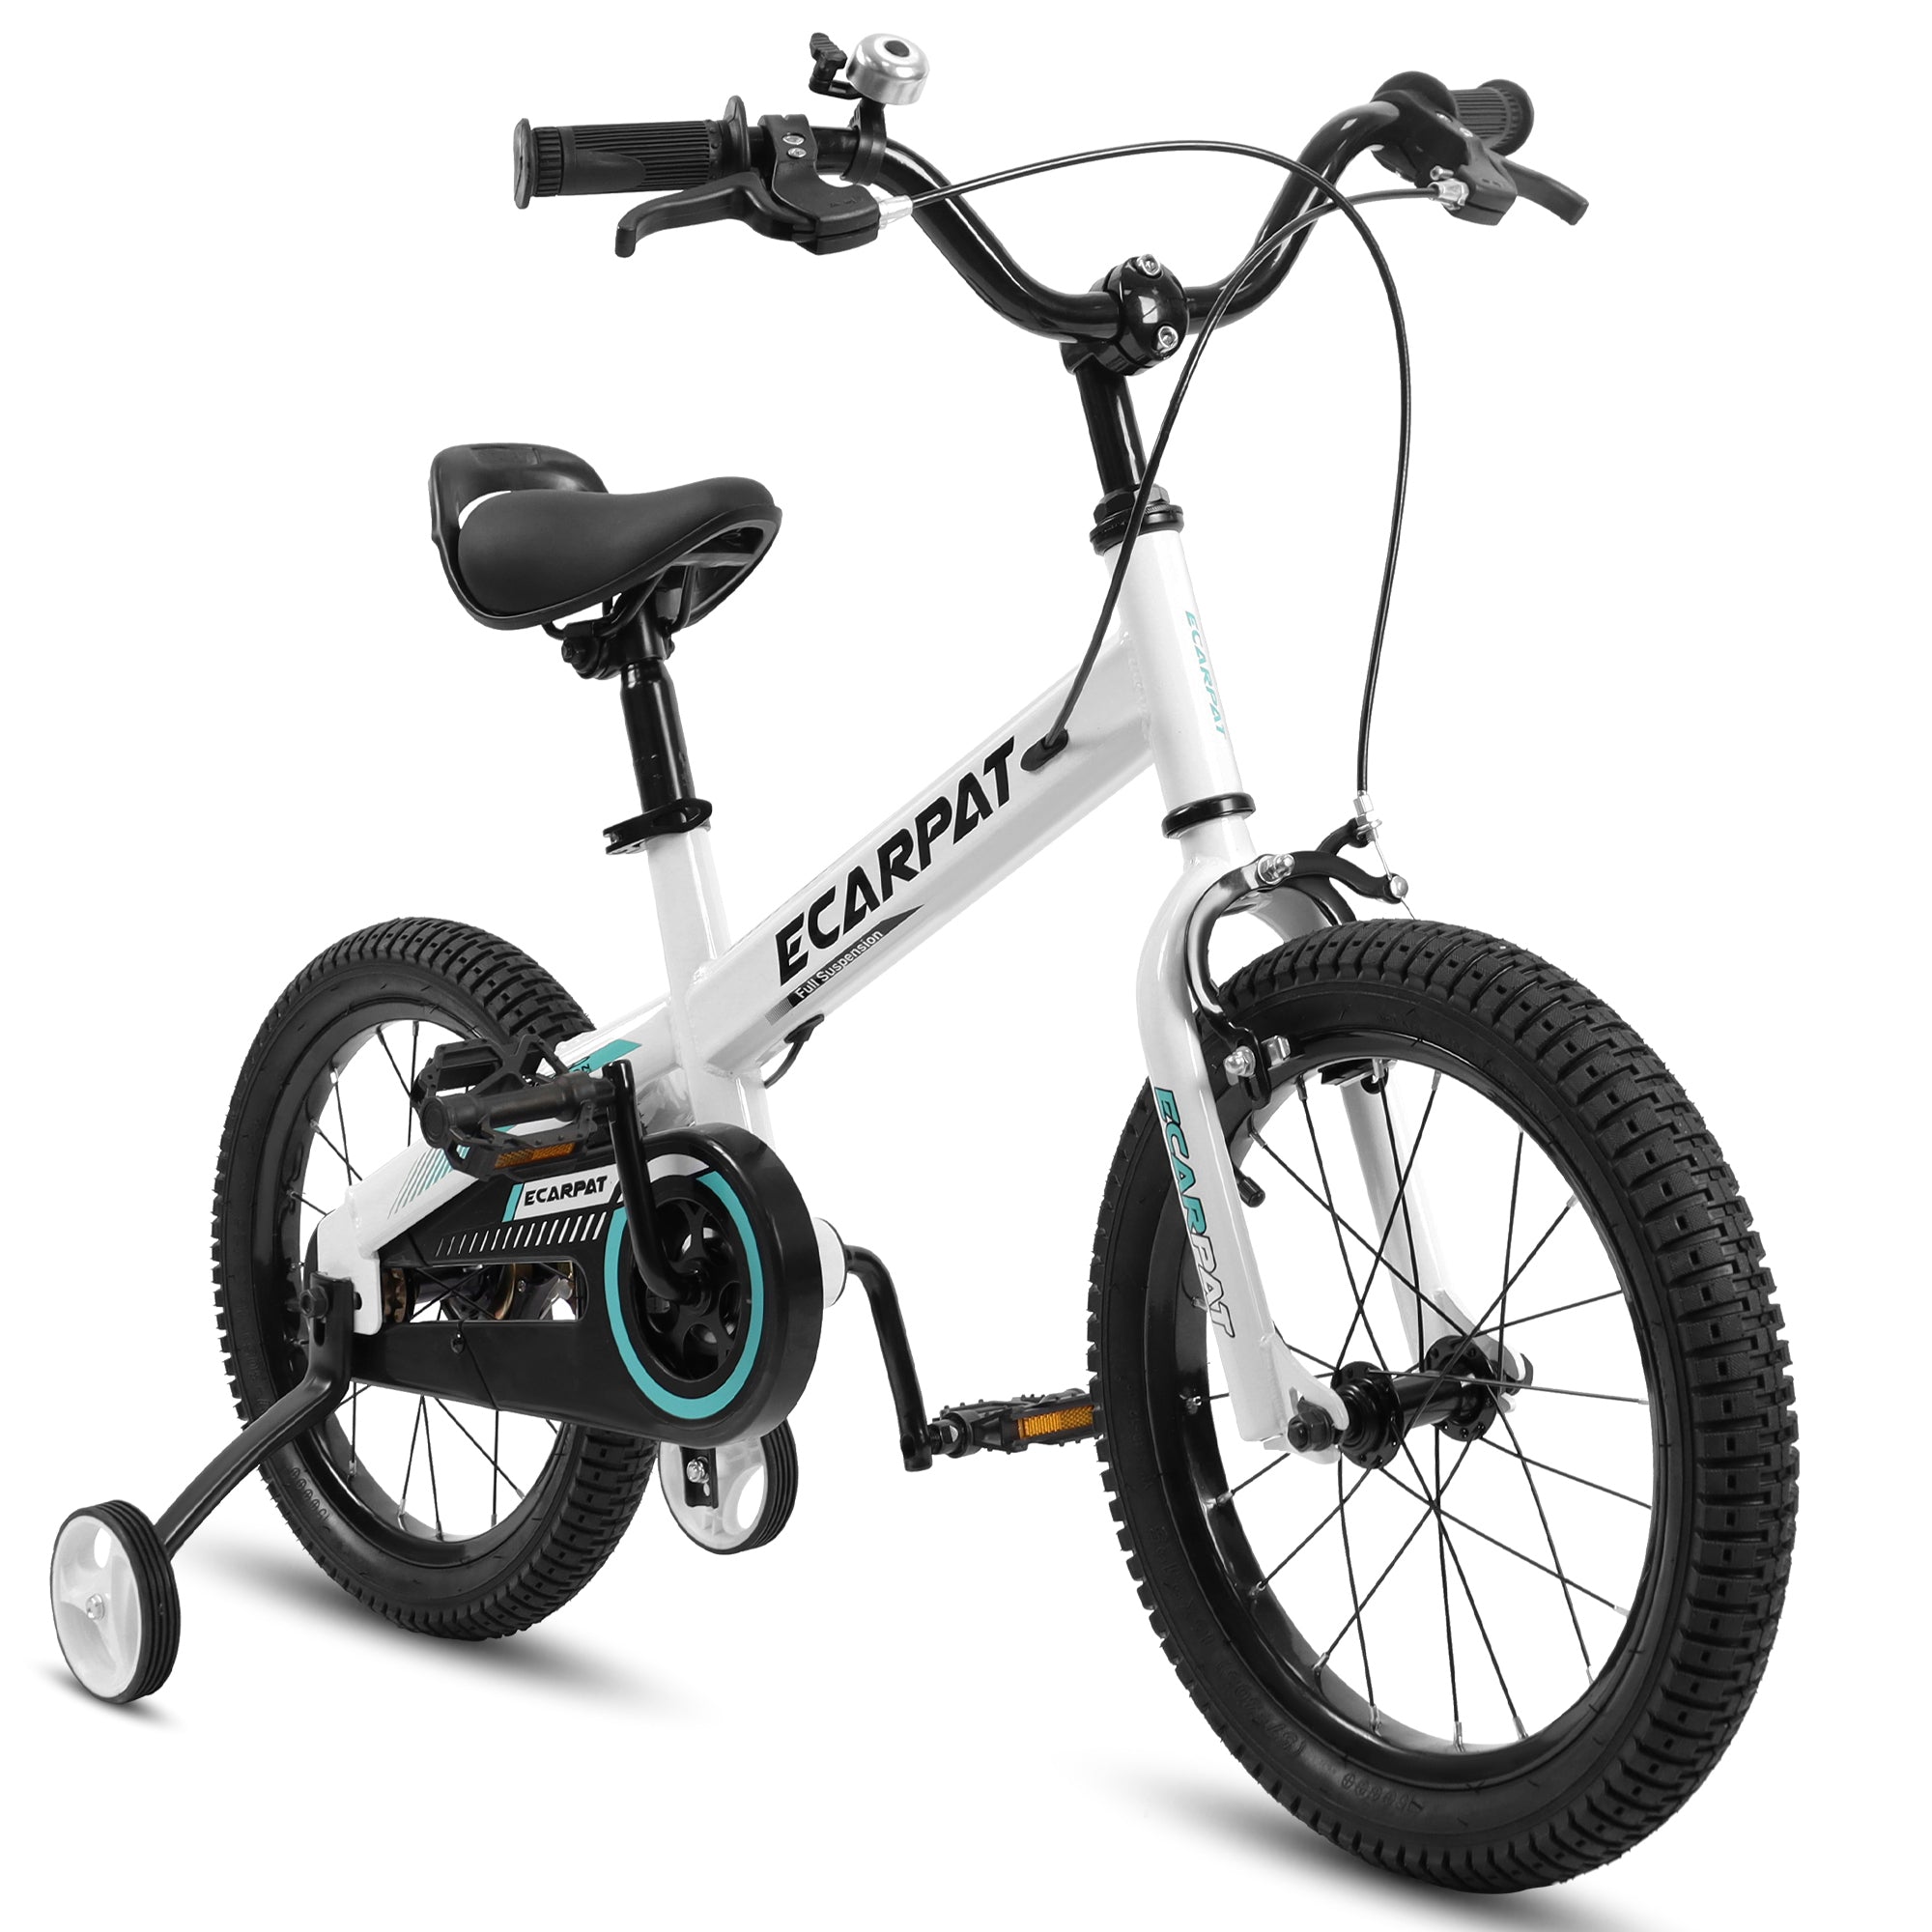 C16112A-Ecarpat-Kid's-Bike-16-Inch-Wheels,1-Speed-Boys-Girls-Child-Bicycles-For-4-7Years,With-Removable-Training-Wheels-Baby-Toys,Coaster+V-Brake-Exercise-&-Fitness